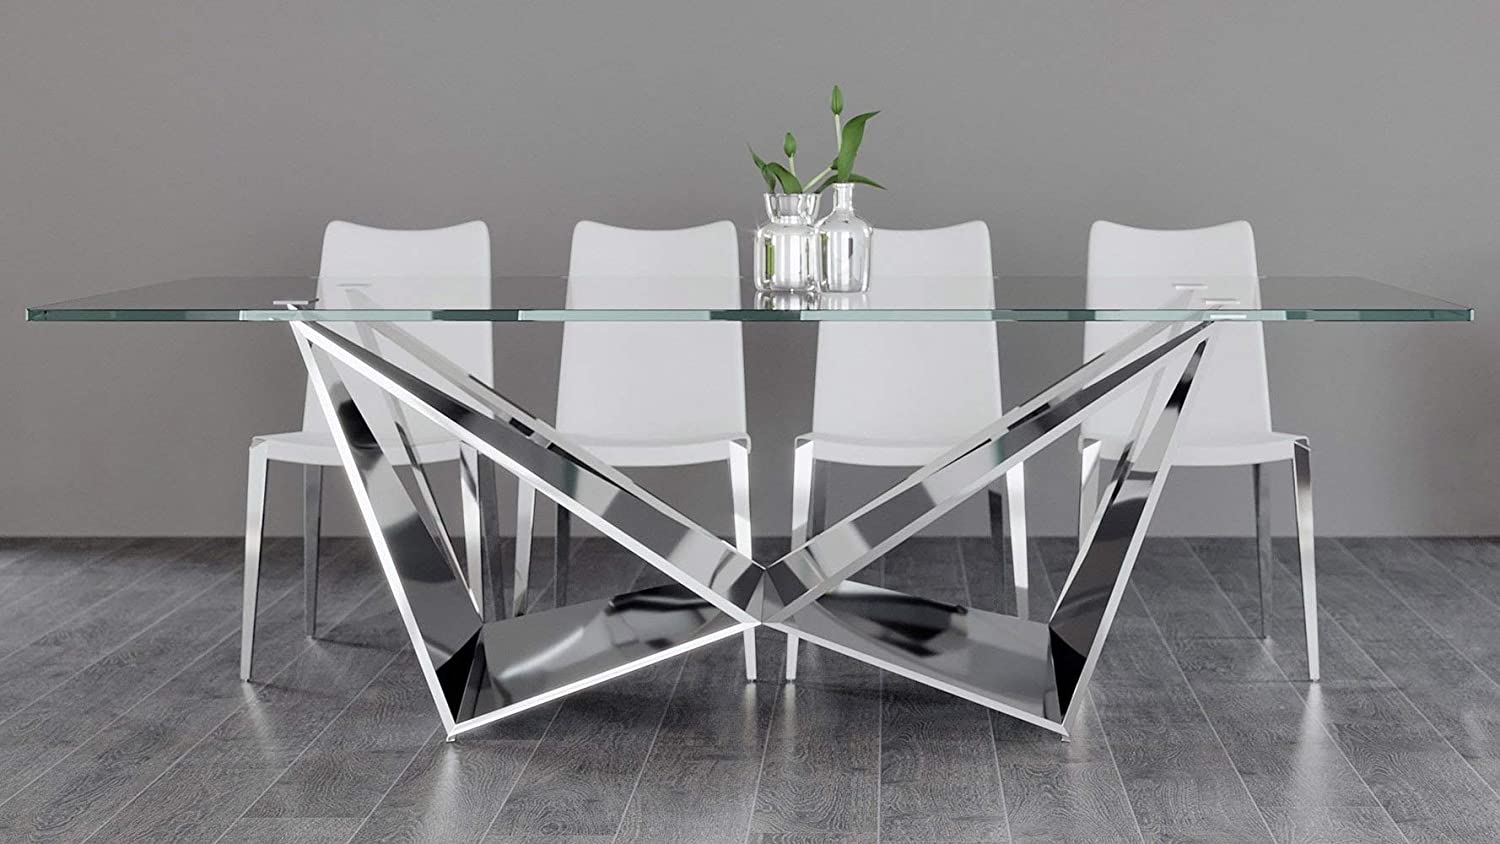 B07Q58RQ32 Zuri Modern Serra 94 Inch Dining Table - Clear Glass with Polished Stainless Steel Base